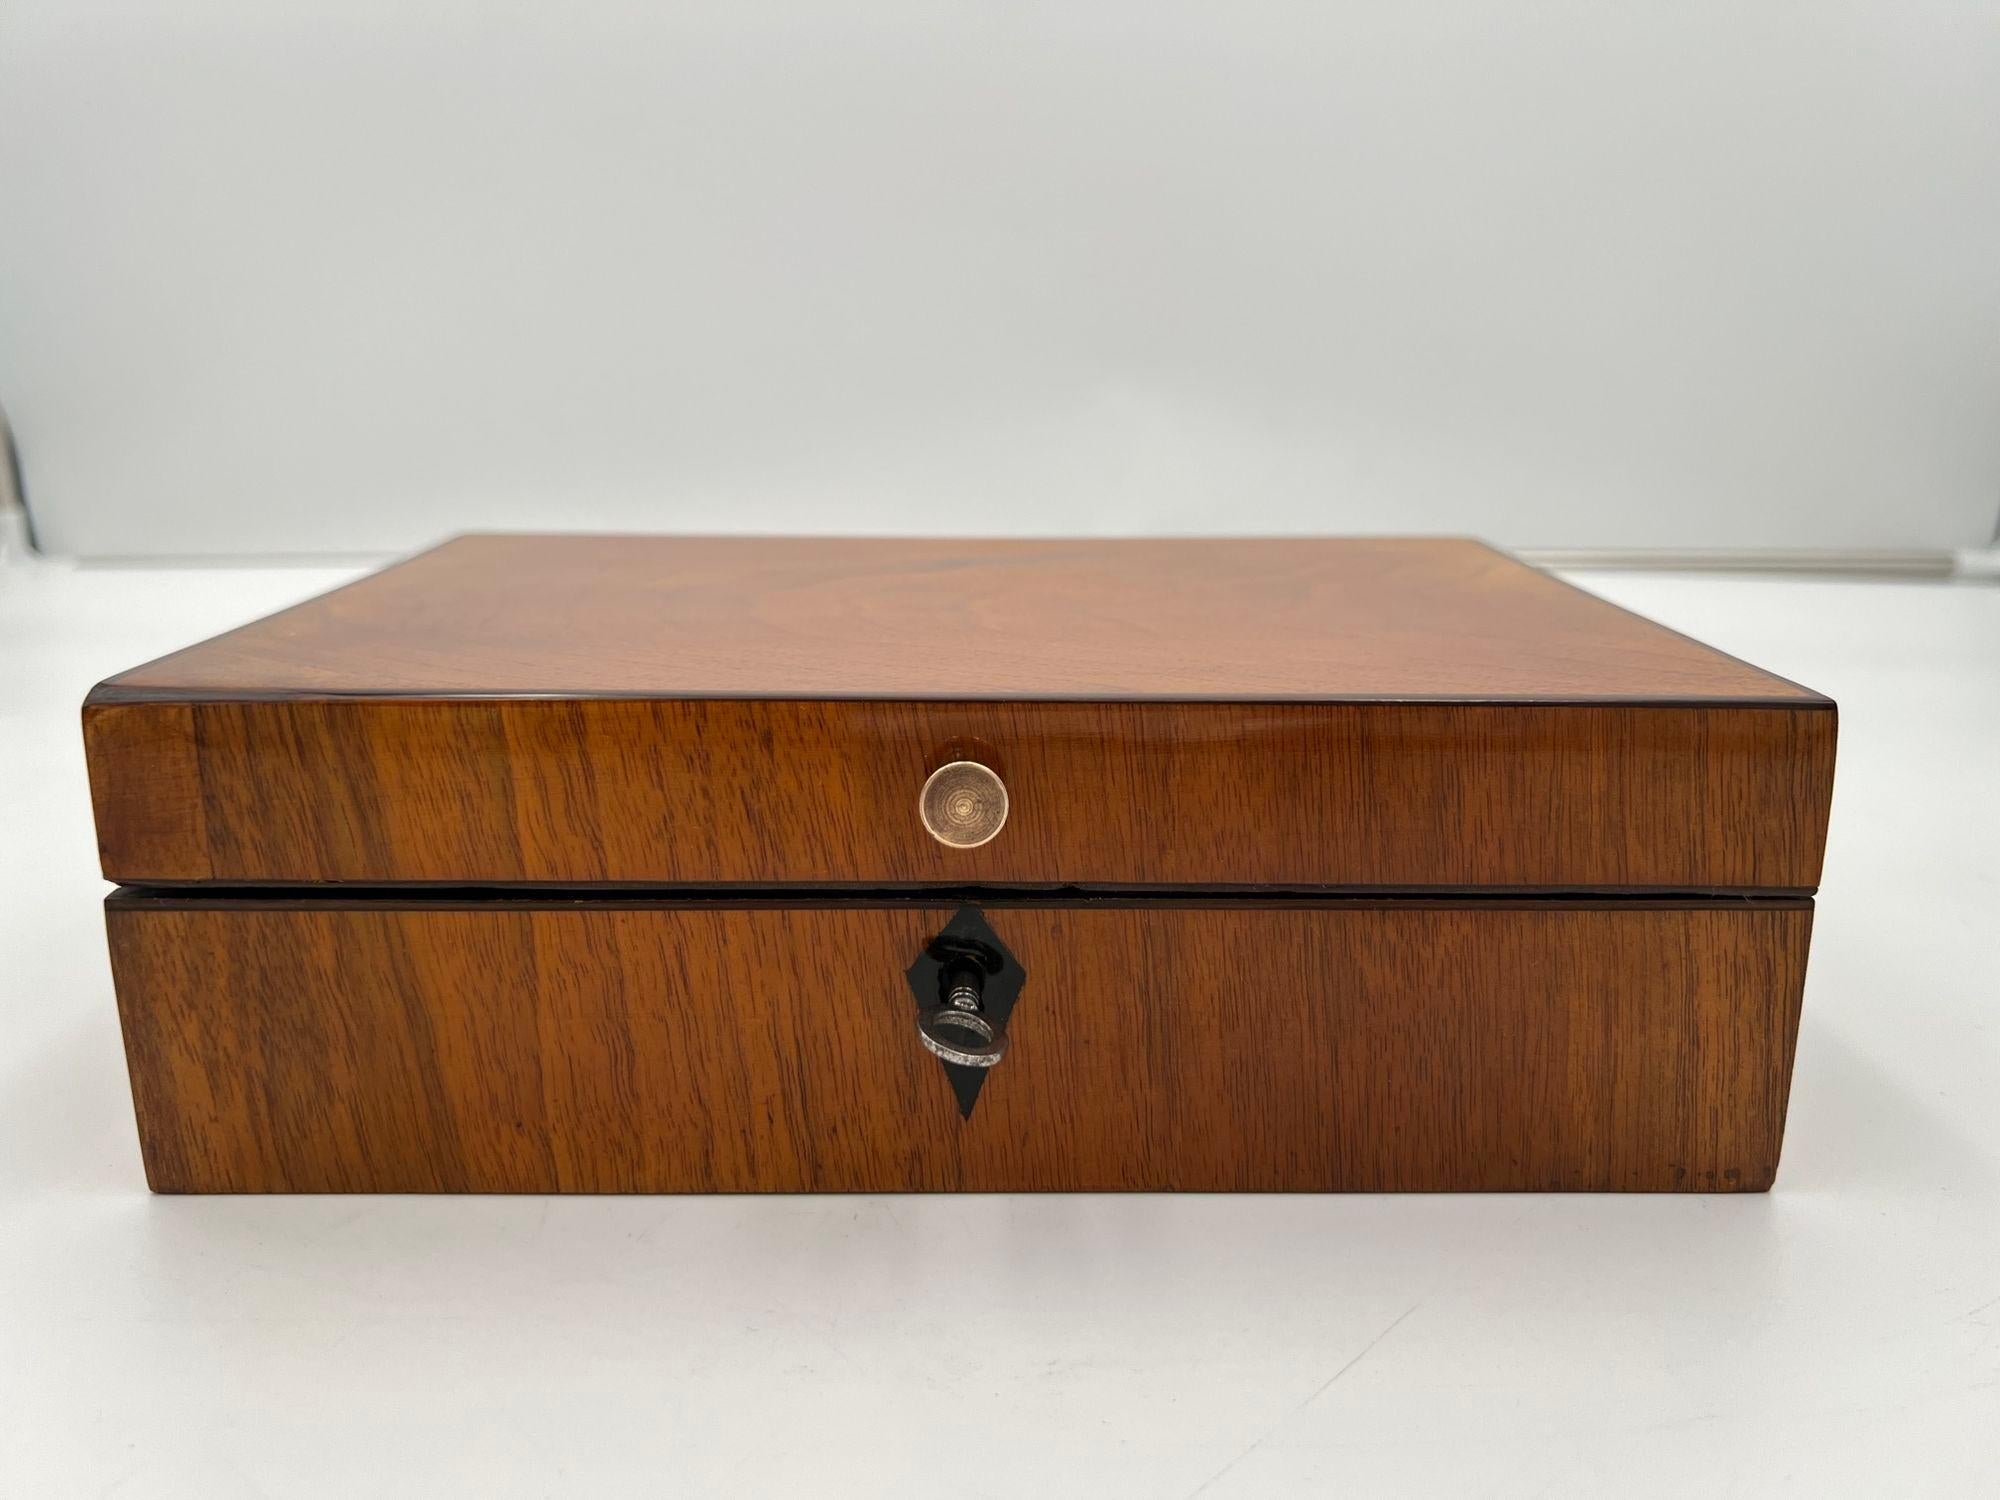 Beautiful original antique Biedermeier Sewing Box in Walnut Veneer from Austria circa 1820.
Walnut veneered. Ebony inlays. Brass button. Inside with complete original sewing equipment.
Mirror on the top inside. Restored and hand polished with